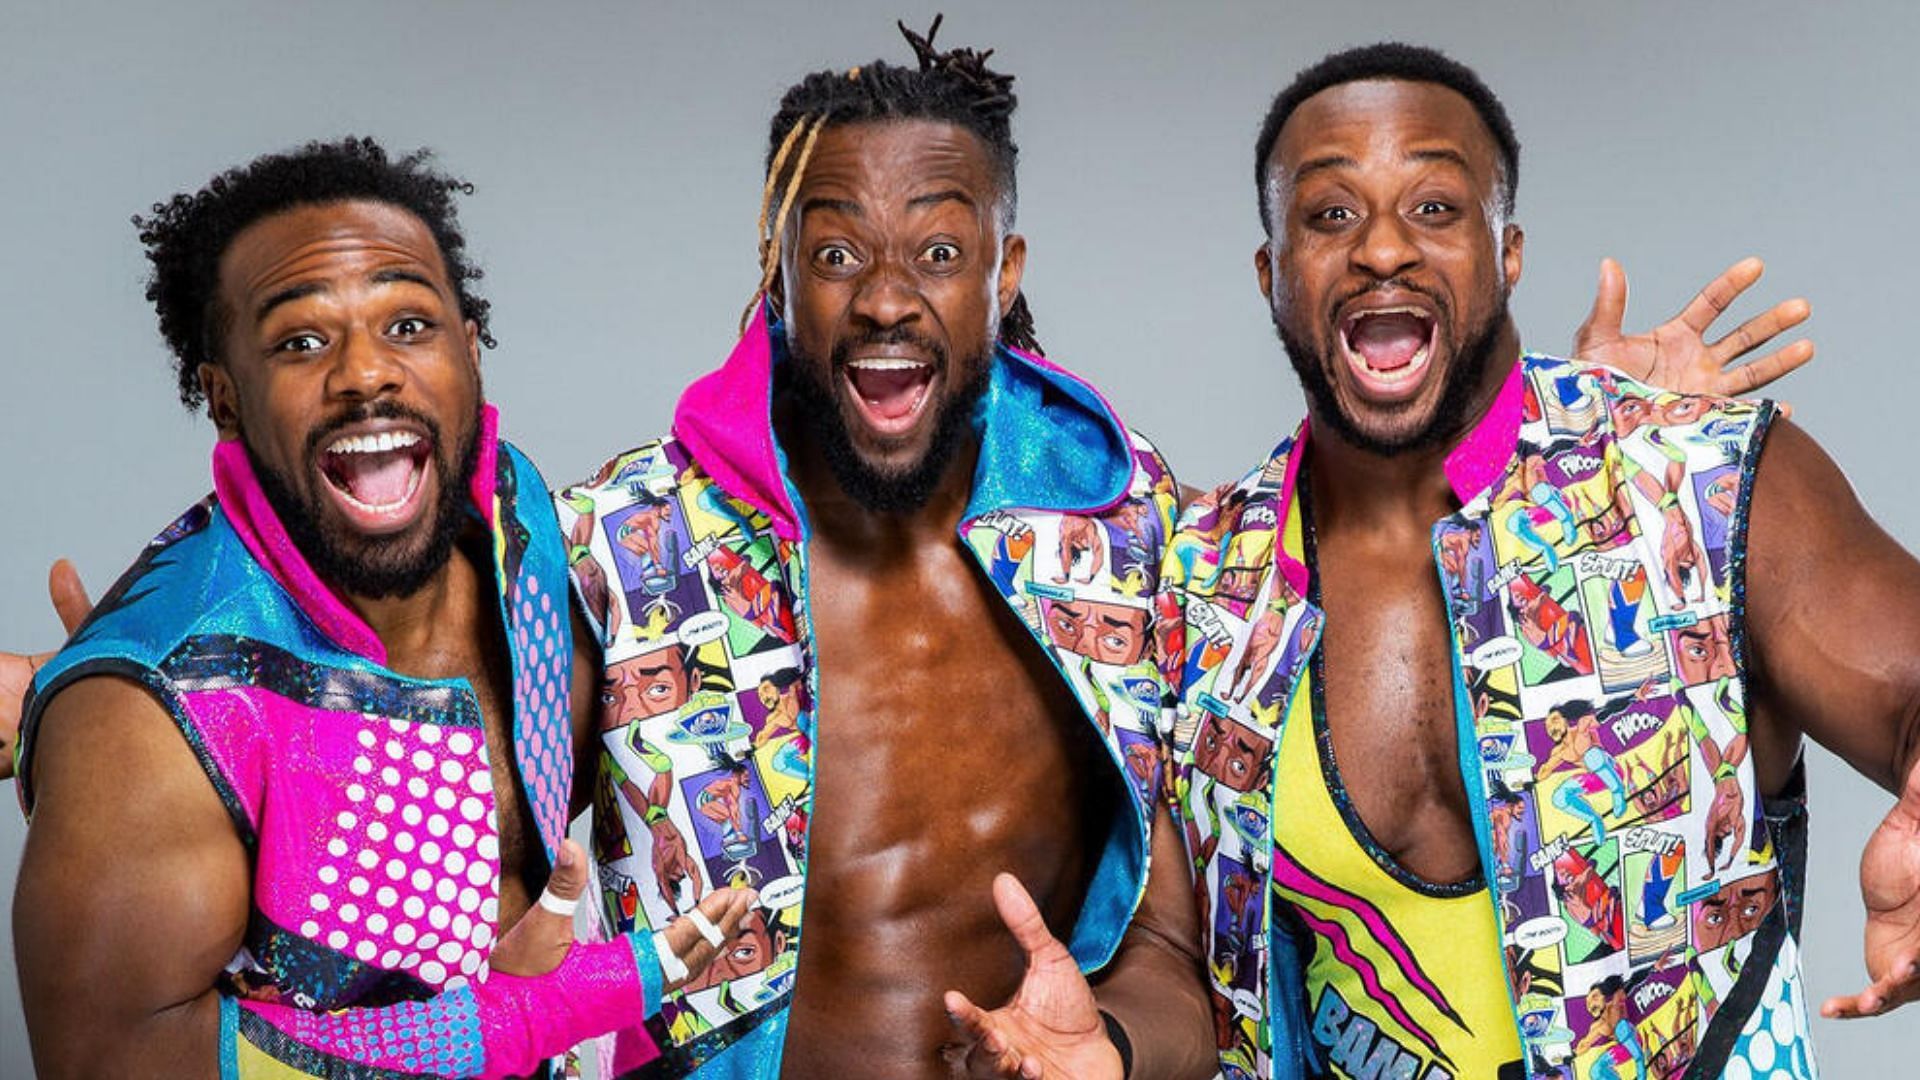 The New Day are a very popular tag team in the company.